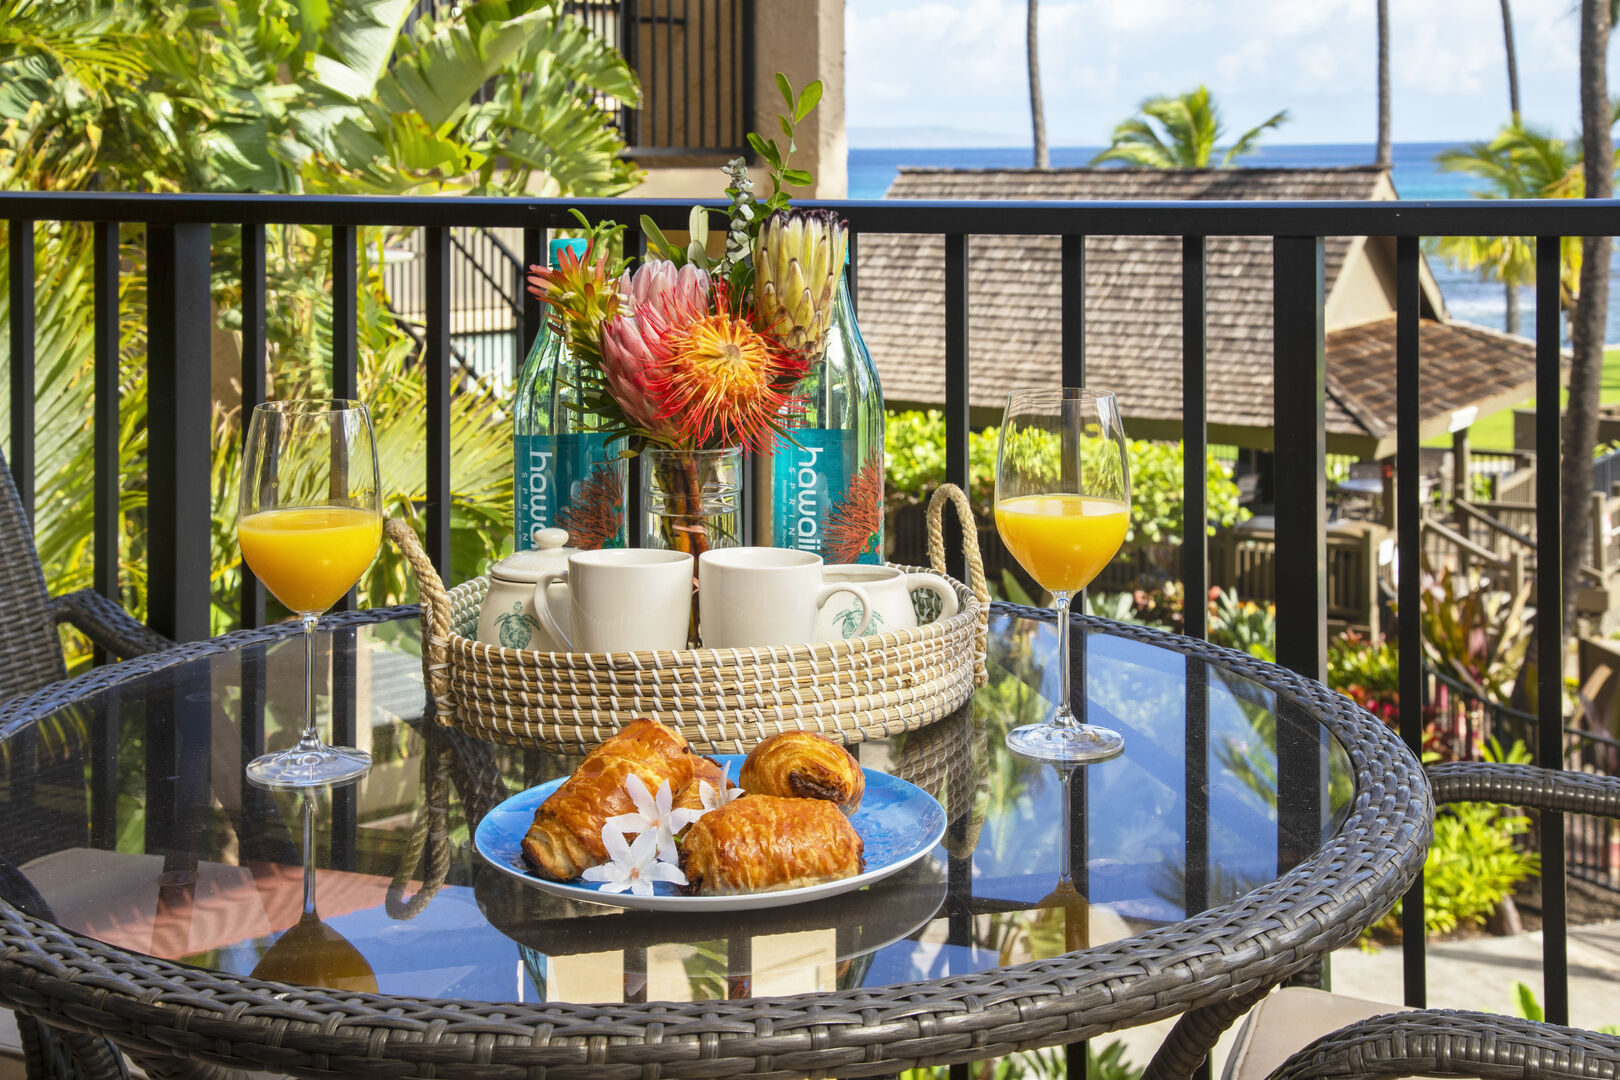 Enjoy your morning coffee or evening cocktails from your balcony!